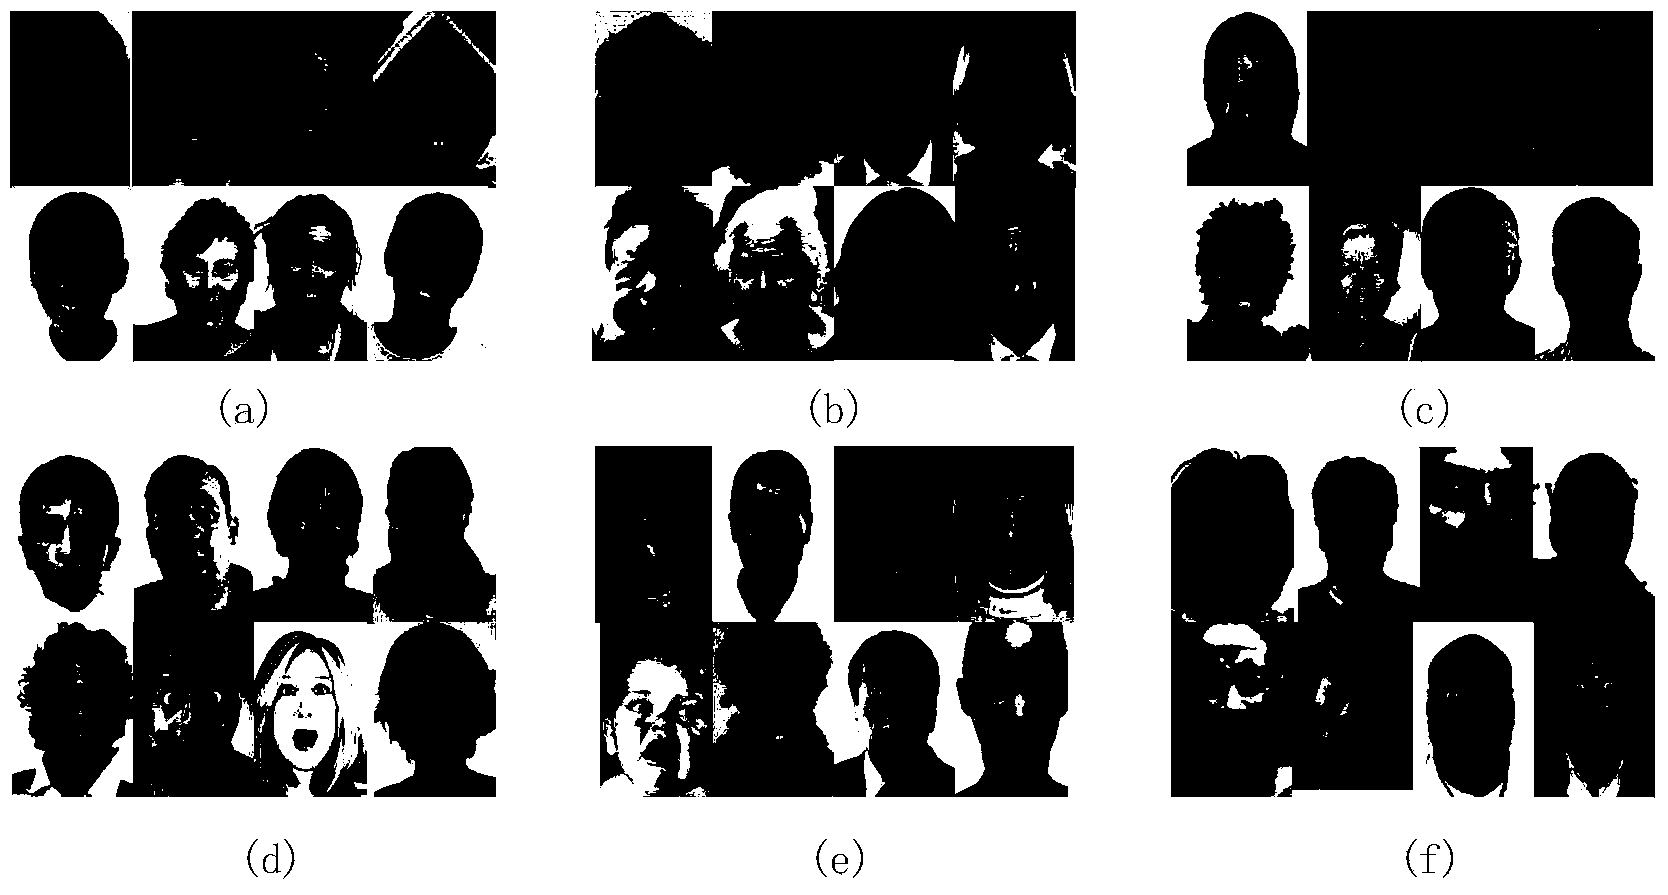 Large-scale facial expression recognition method based on multiscale LBP and sparse coding